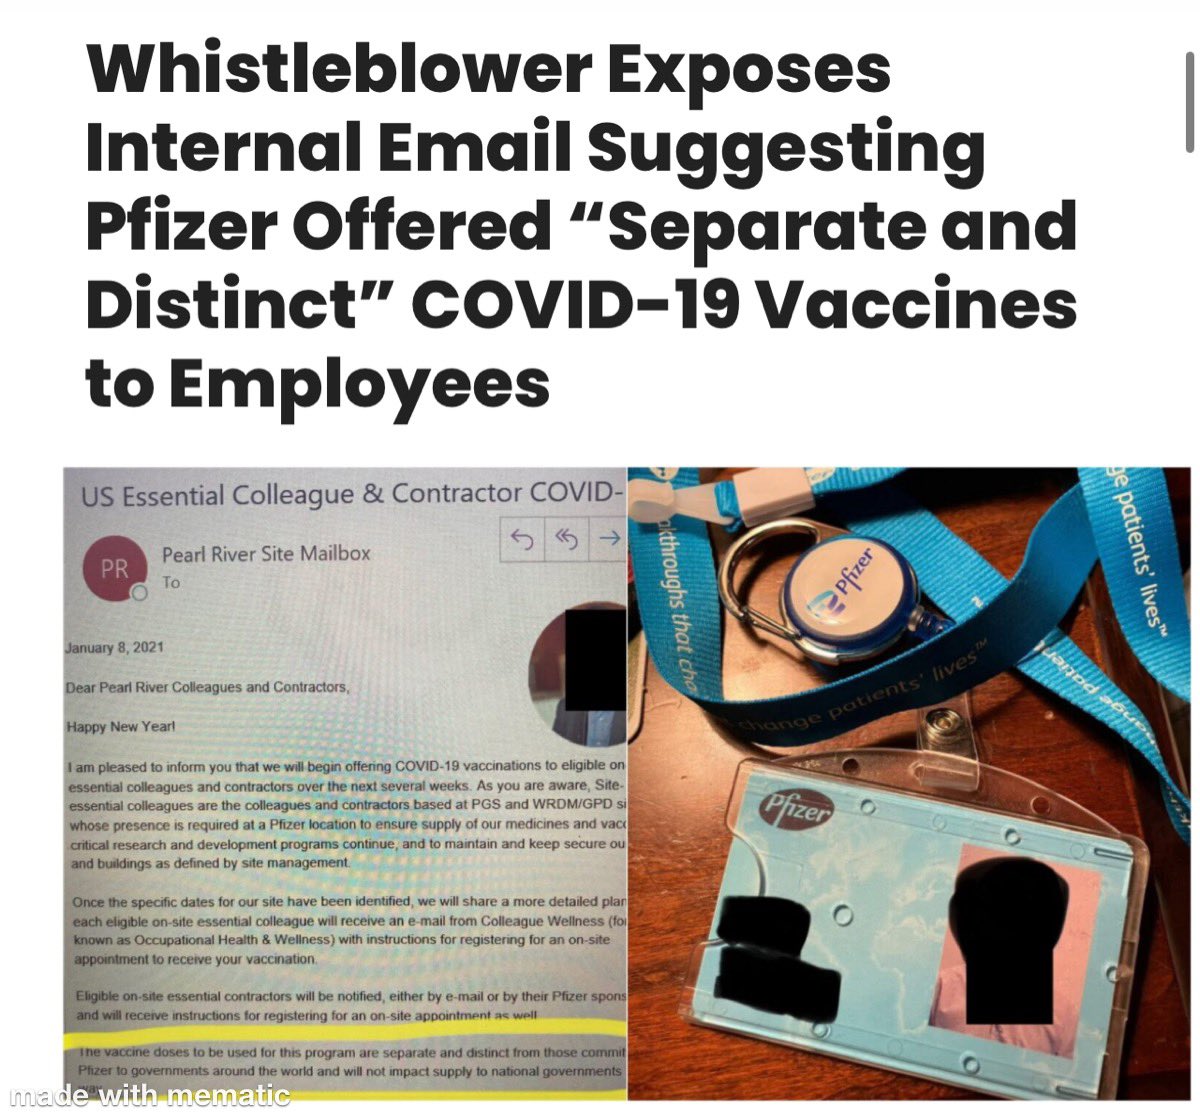 The truth is coming out- and it seems to be exactly as we all suspected: A whistleblower from Pfizer has leaked an internal email indicating that the pharmaceutical giant offered a “separate and distinct” COVID-19 vaccine to employees at its Pearl River research site in